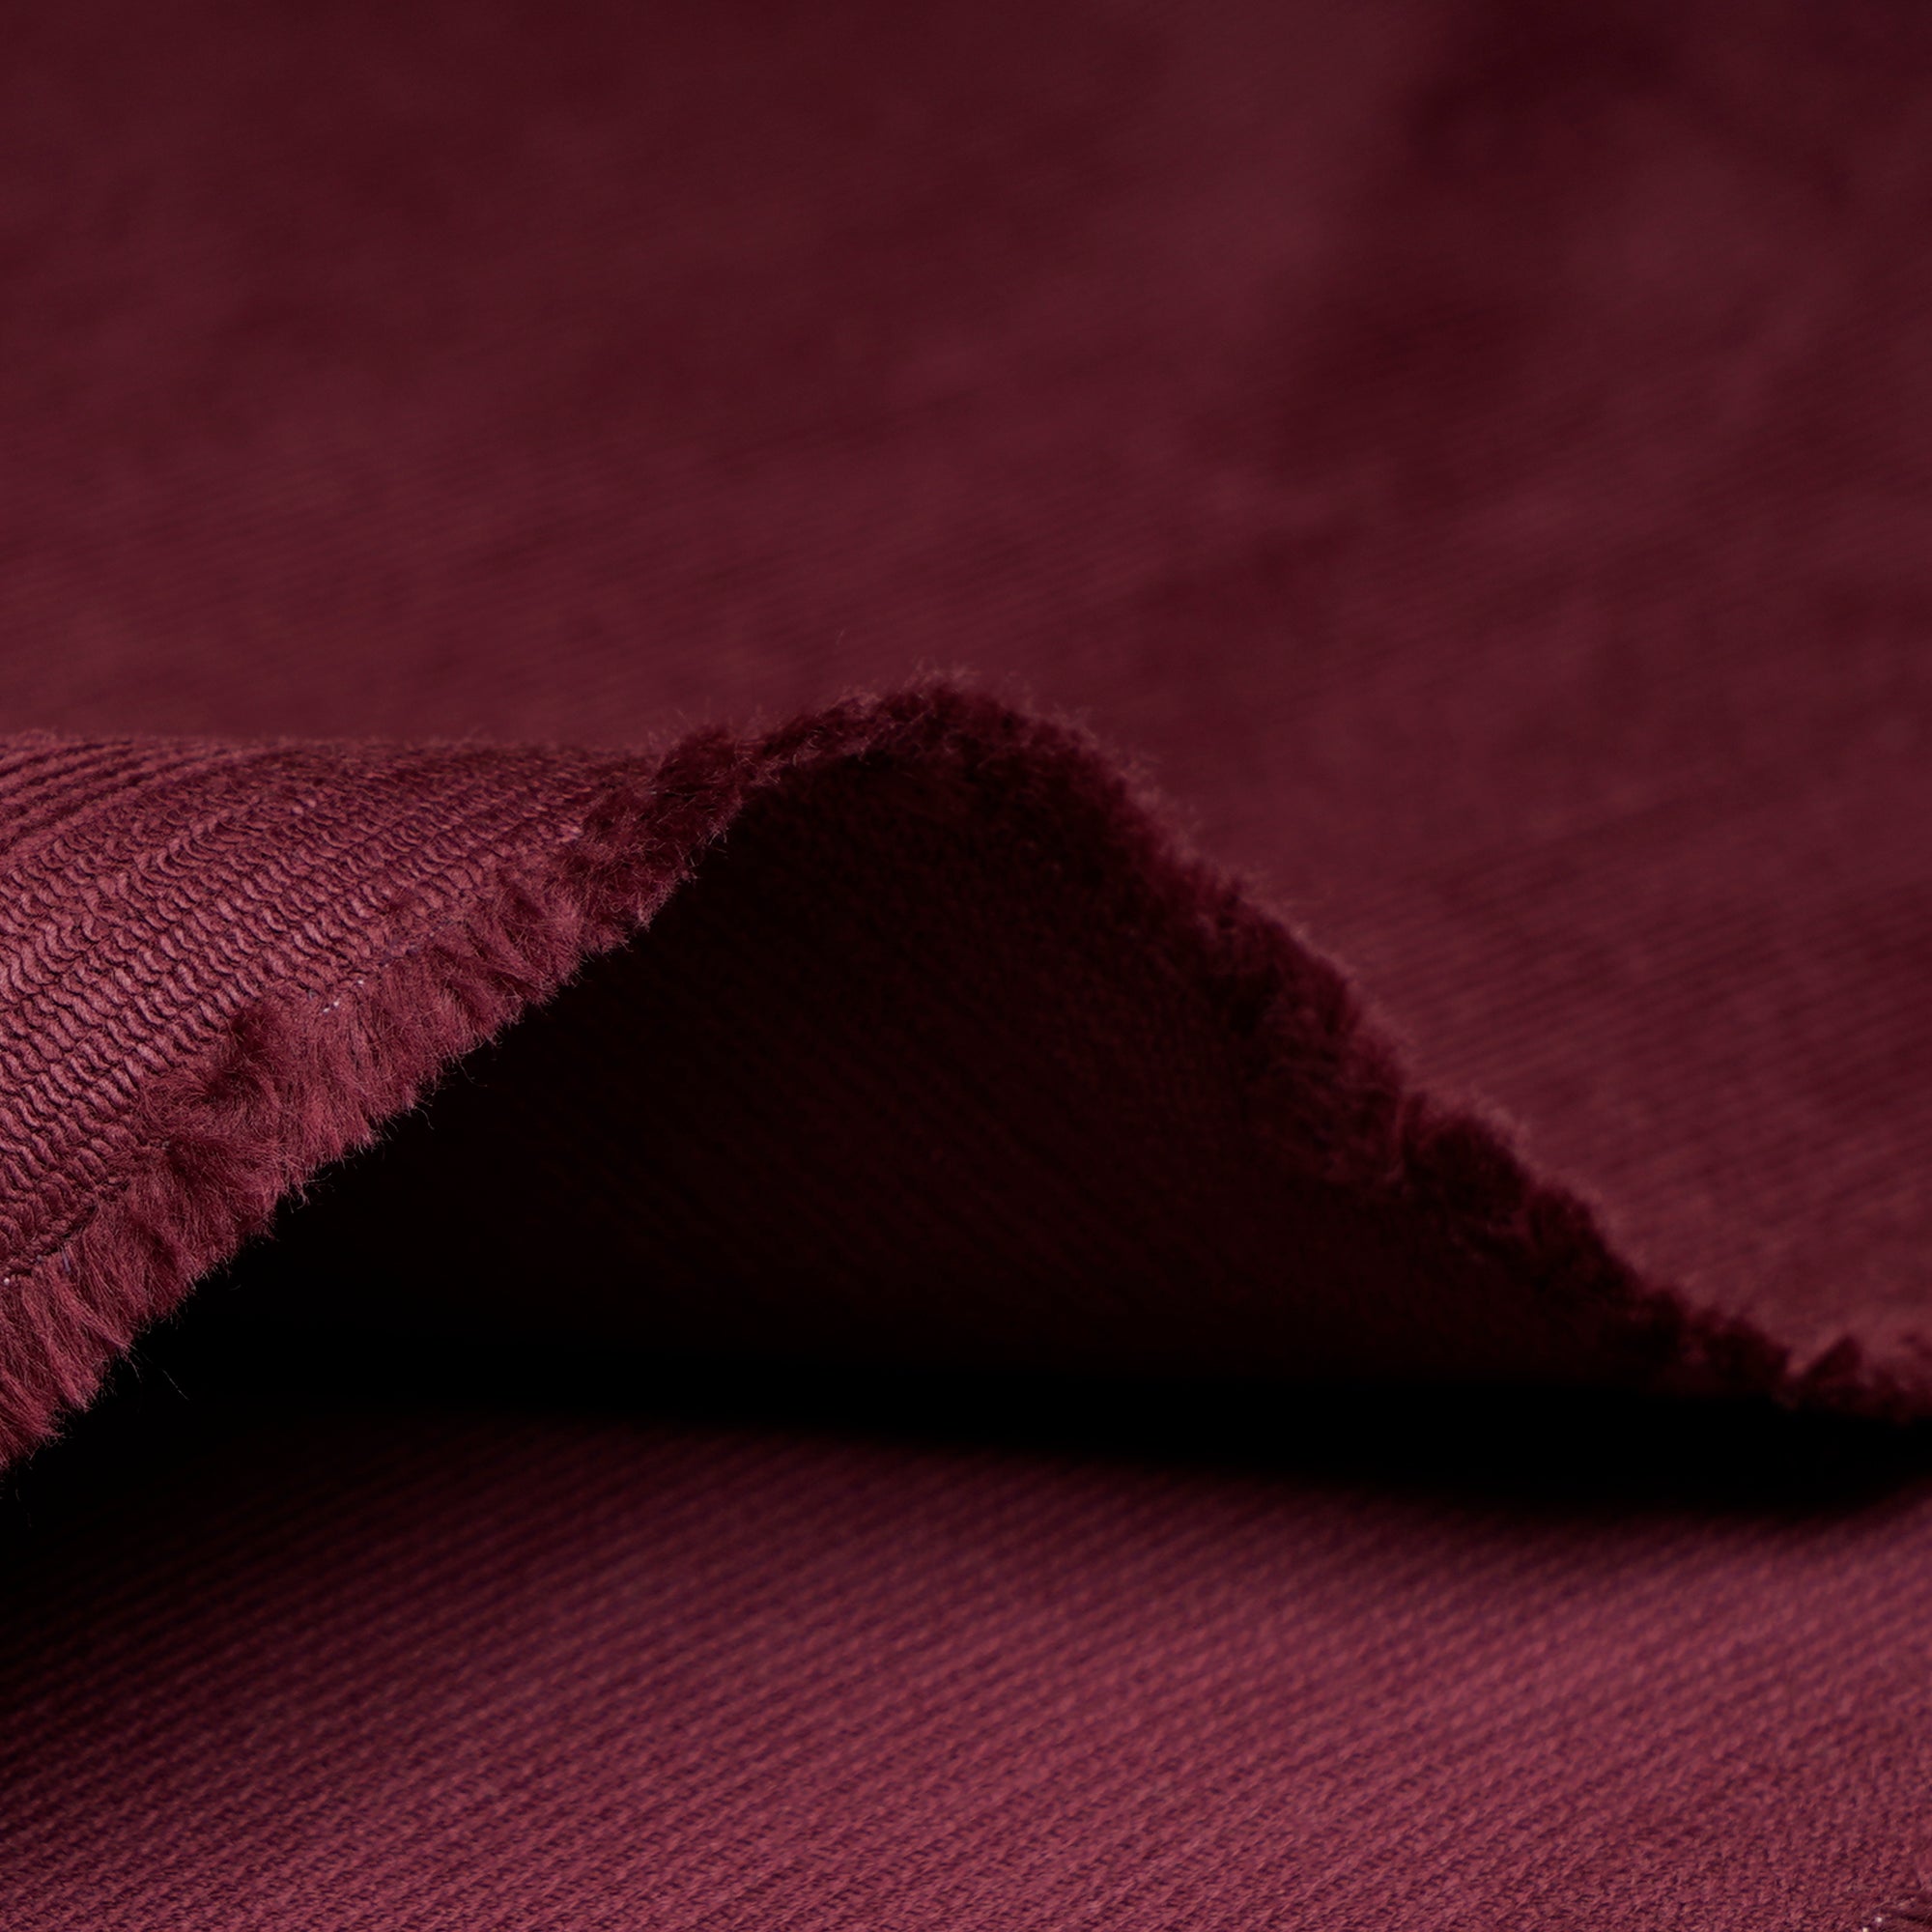 Red Plum Imported Bottom Weight Cotton Corduroy Fabric (58" Width)